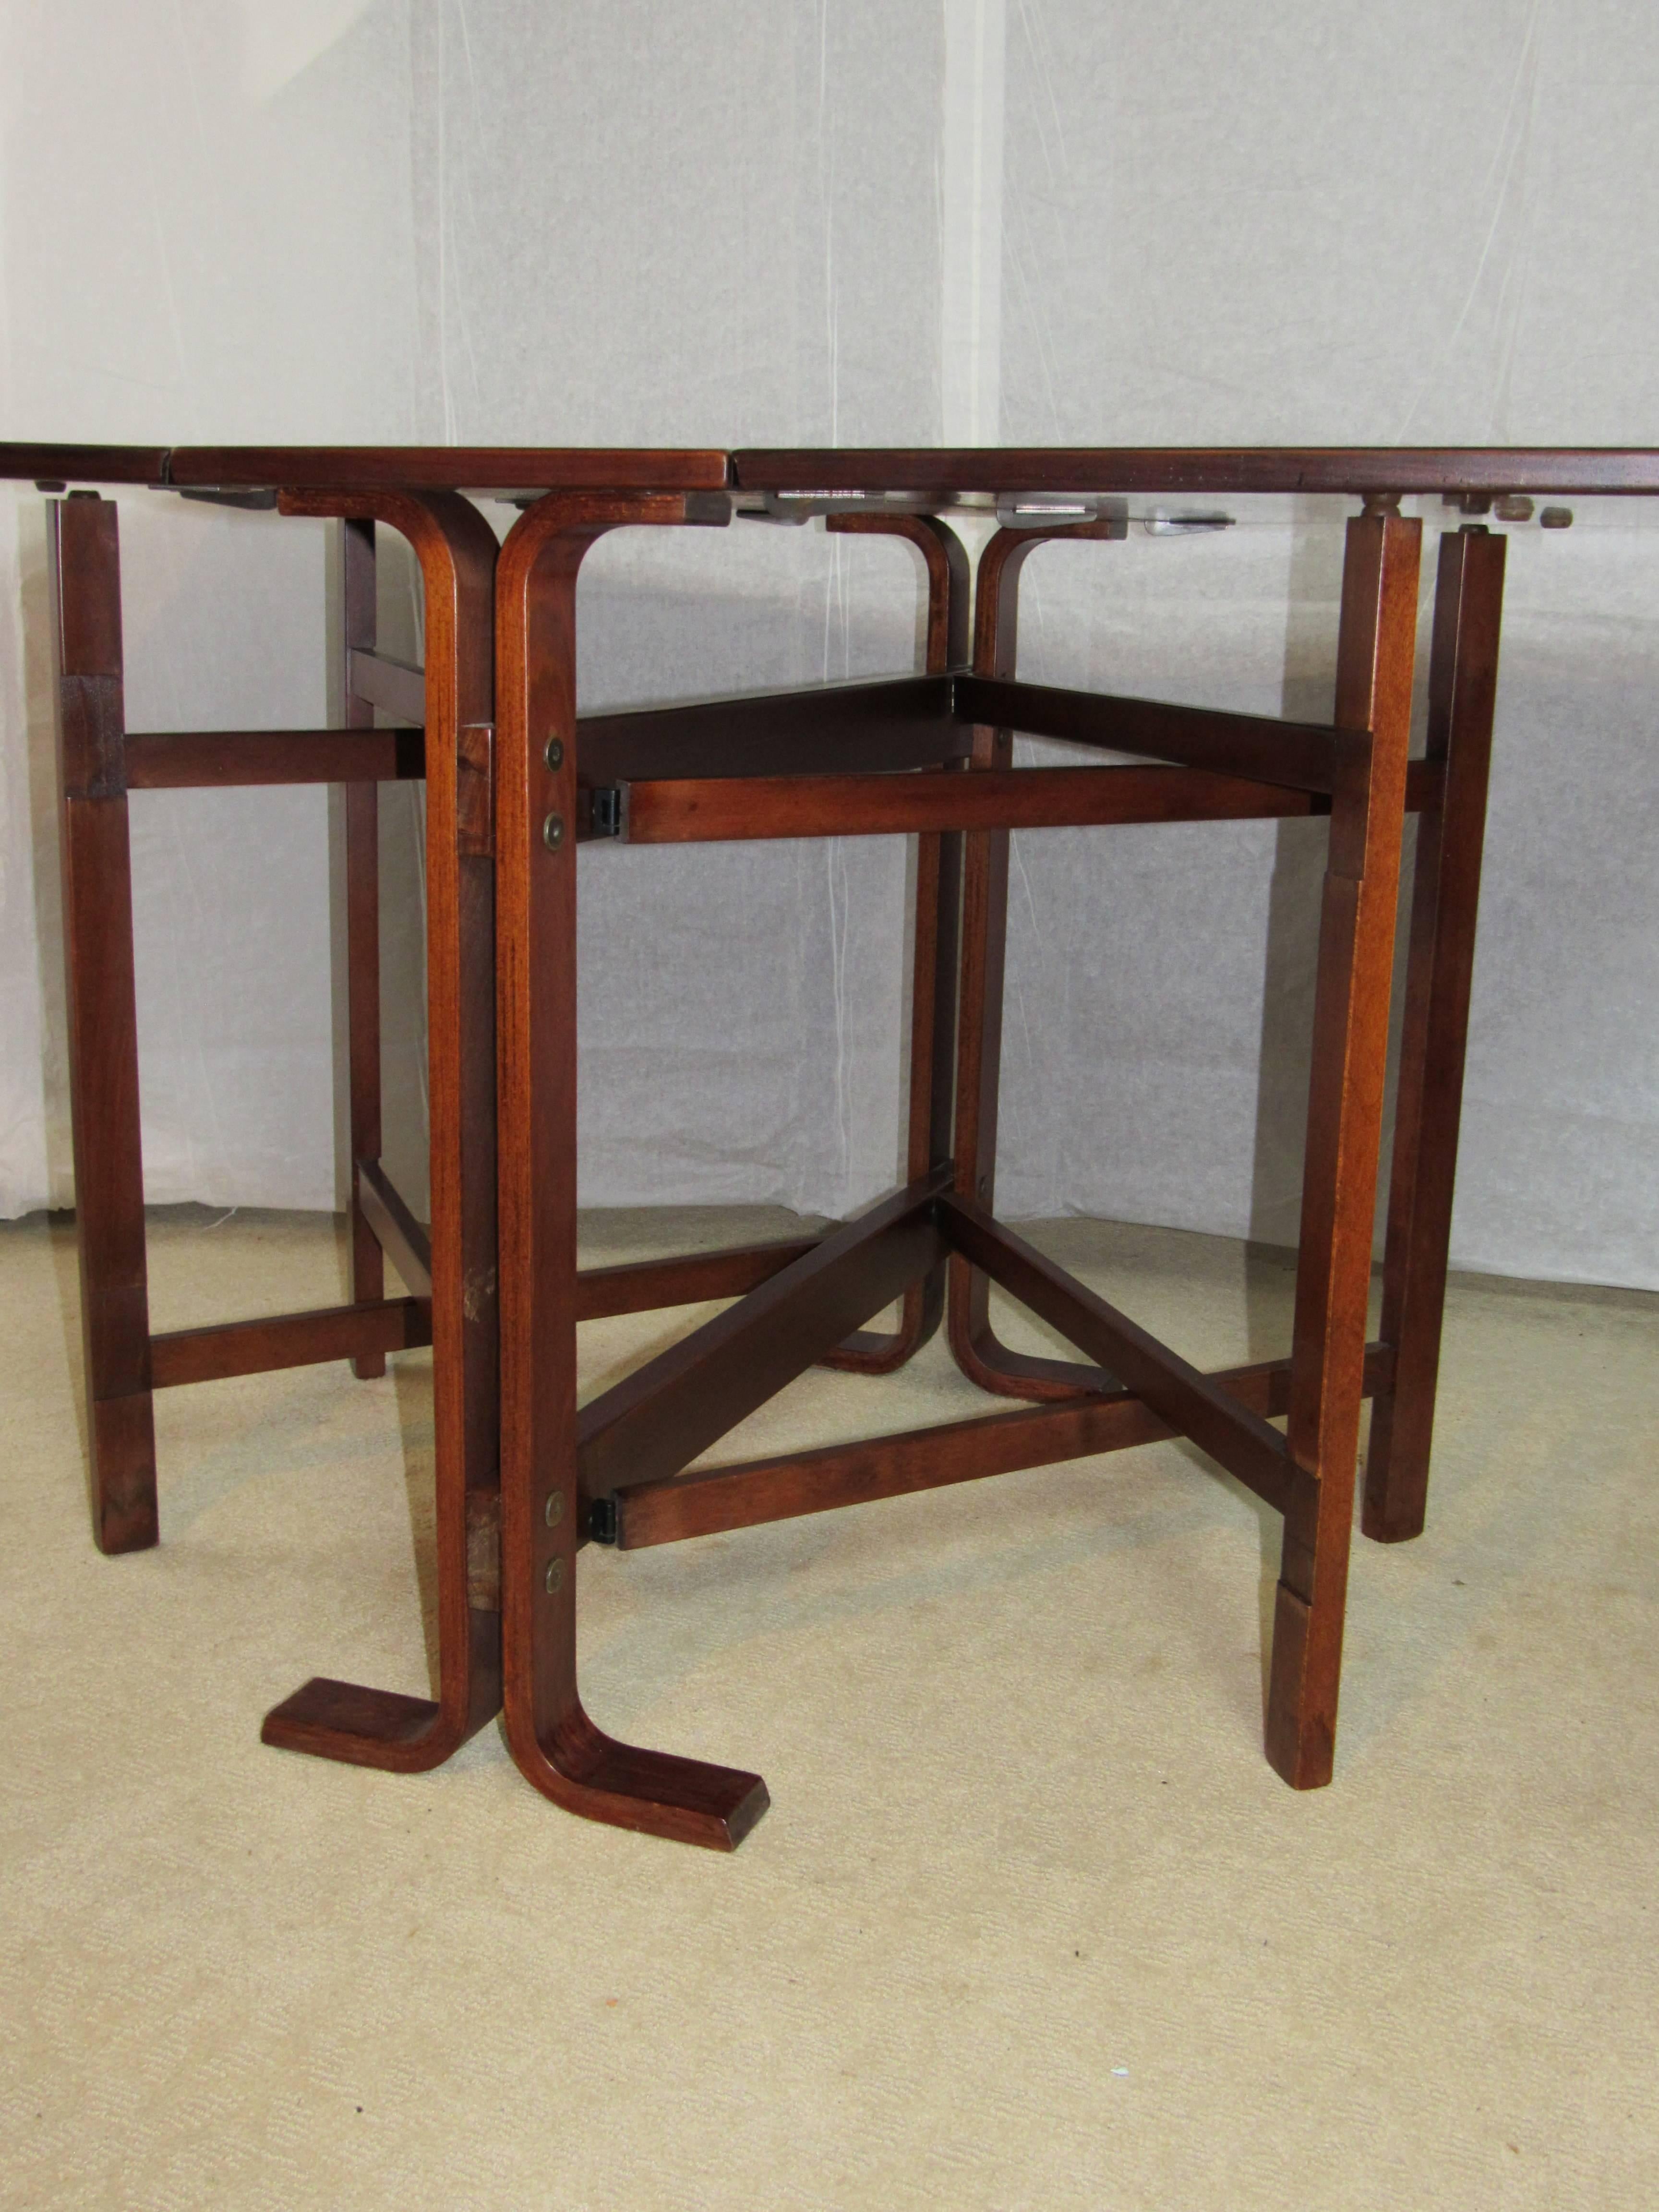 Classic dining table Model NR 4 designed by Bendt Winge for Kleppe Møbelfabrik of Norway in the mid-1950s. This is the rarer version with a rosewood top on a Teak base. Folds down to 13